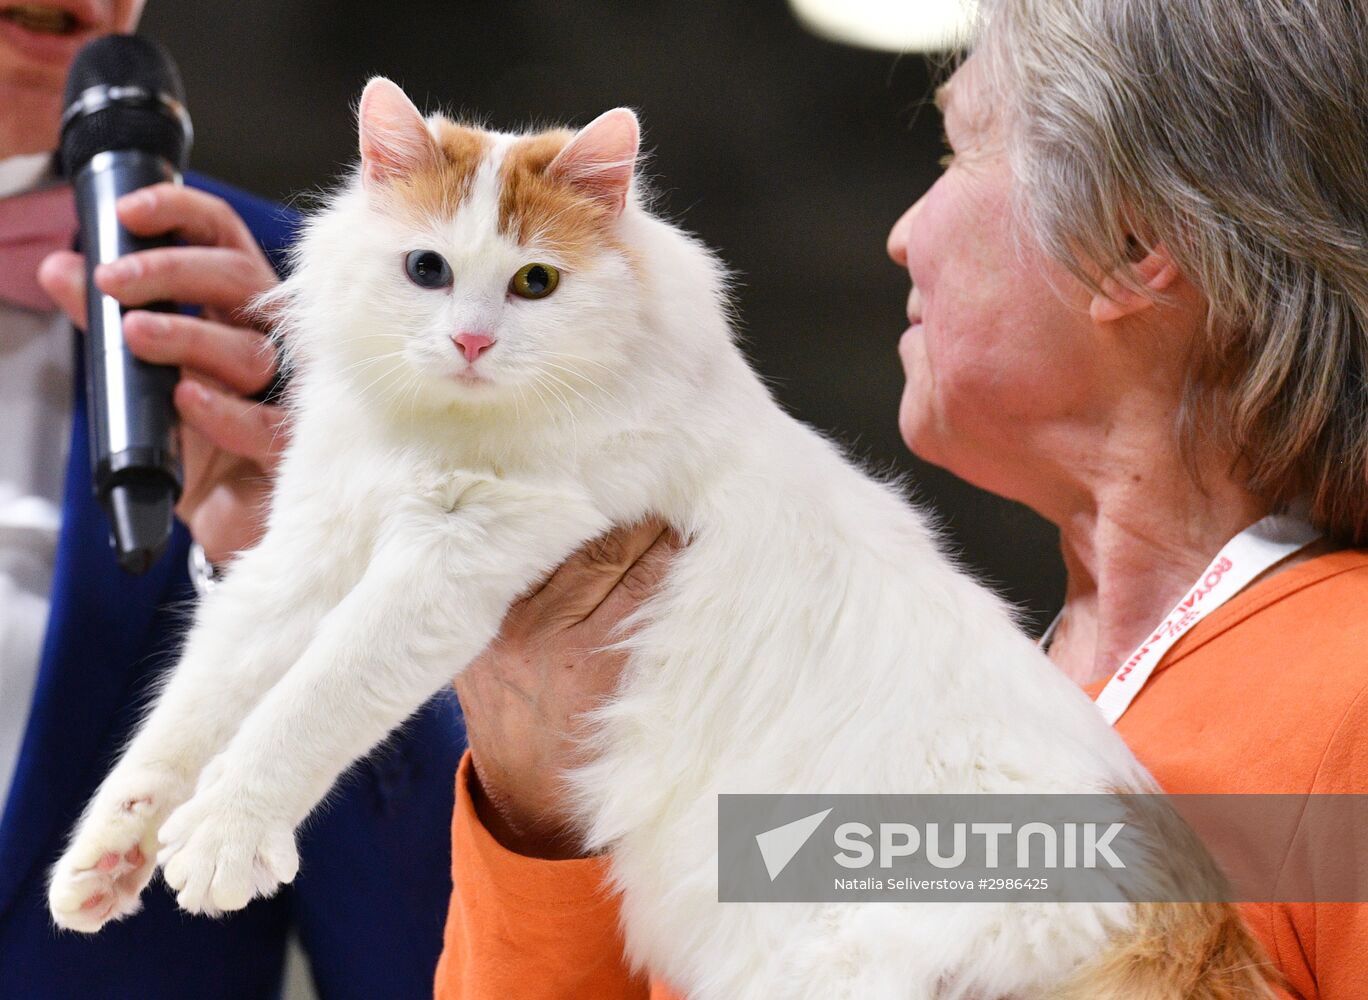 Grand Prix Royal Canin cat show in Moscow